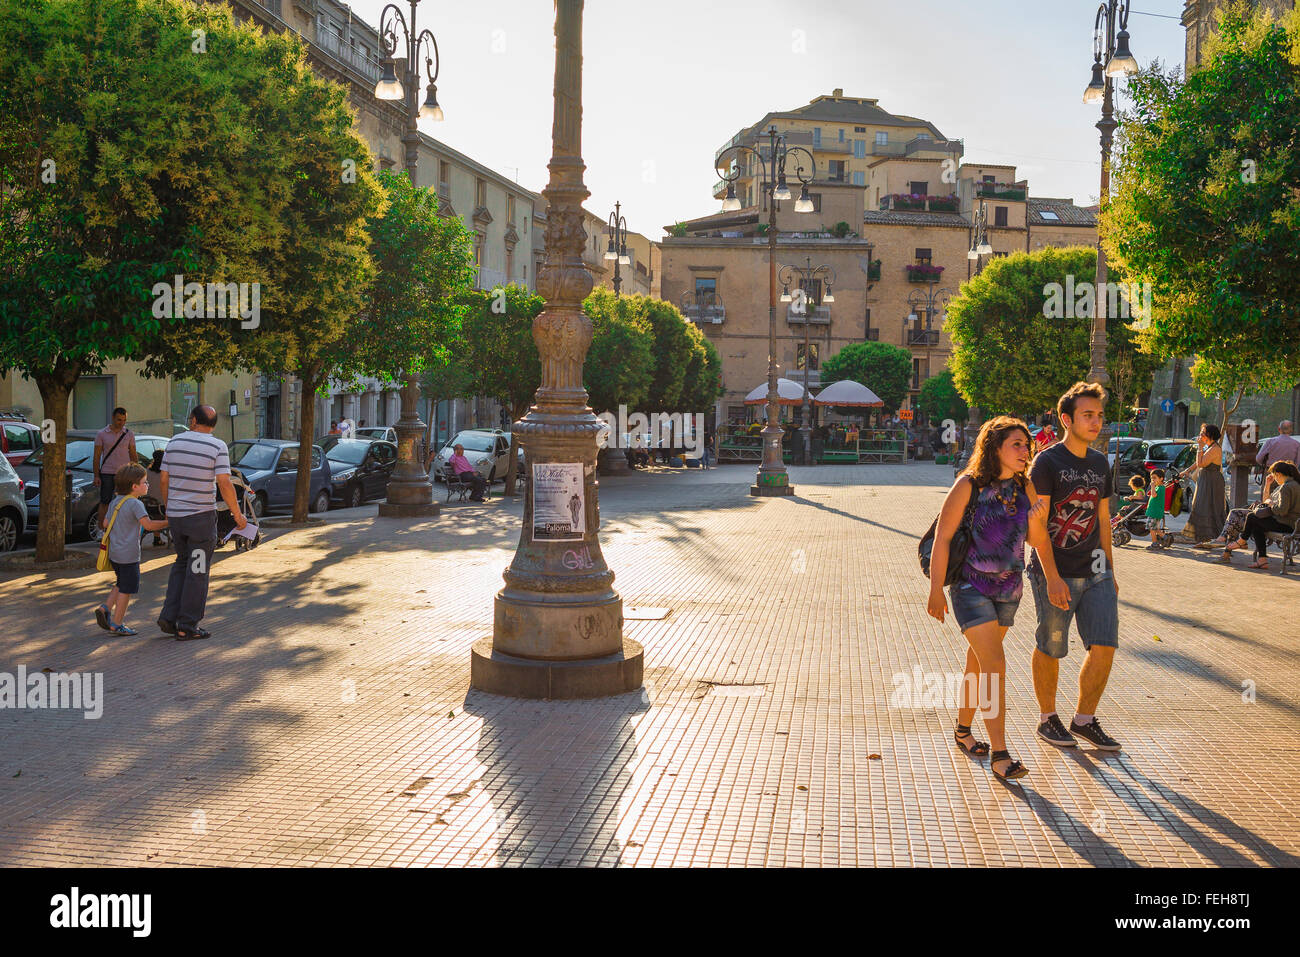 Sicily people, view of Sicilian people passing through the Piazza Vittorio Emanuele in Enna on a late summer afternoon, Sicily, Stock Photo